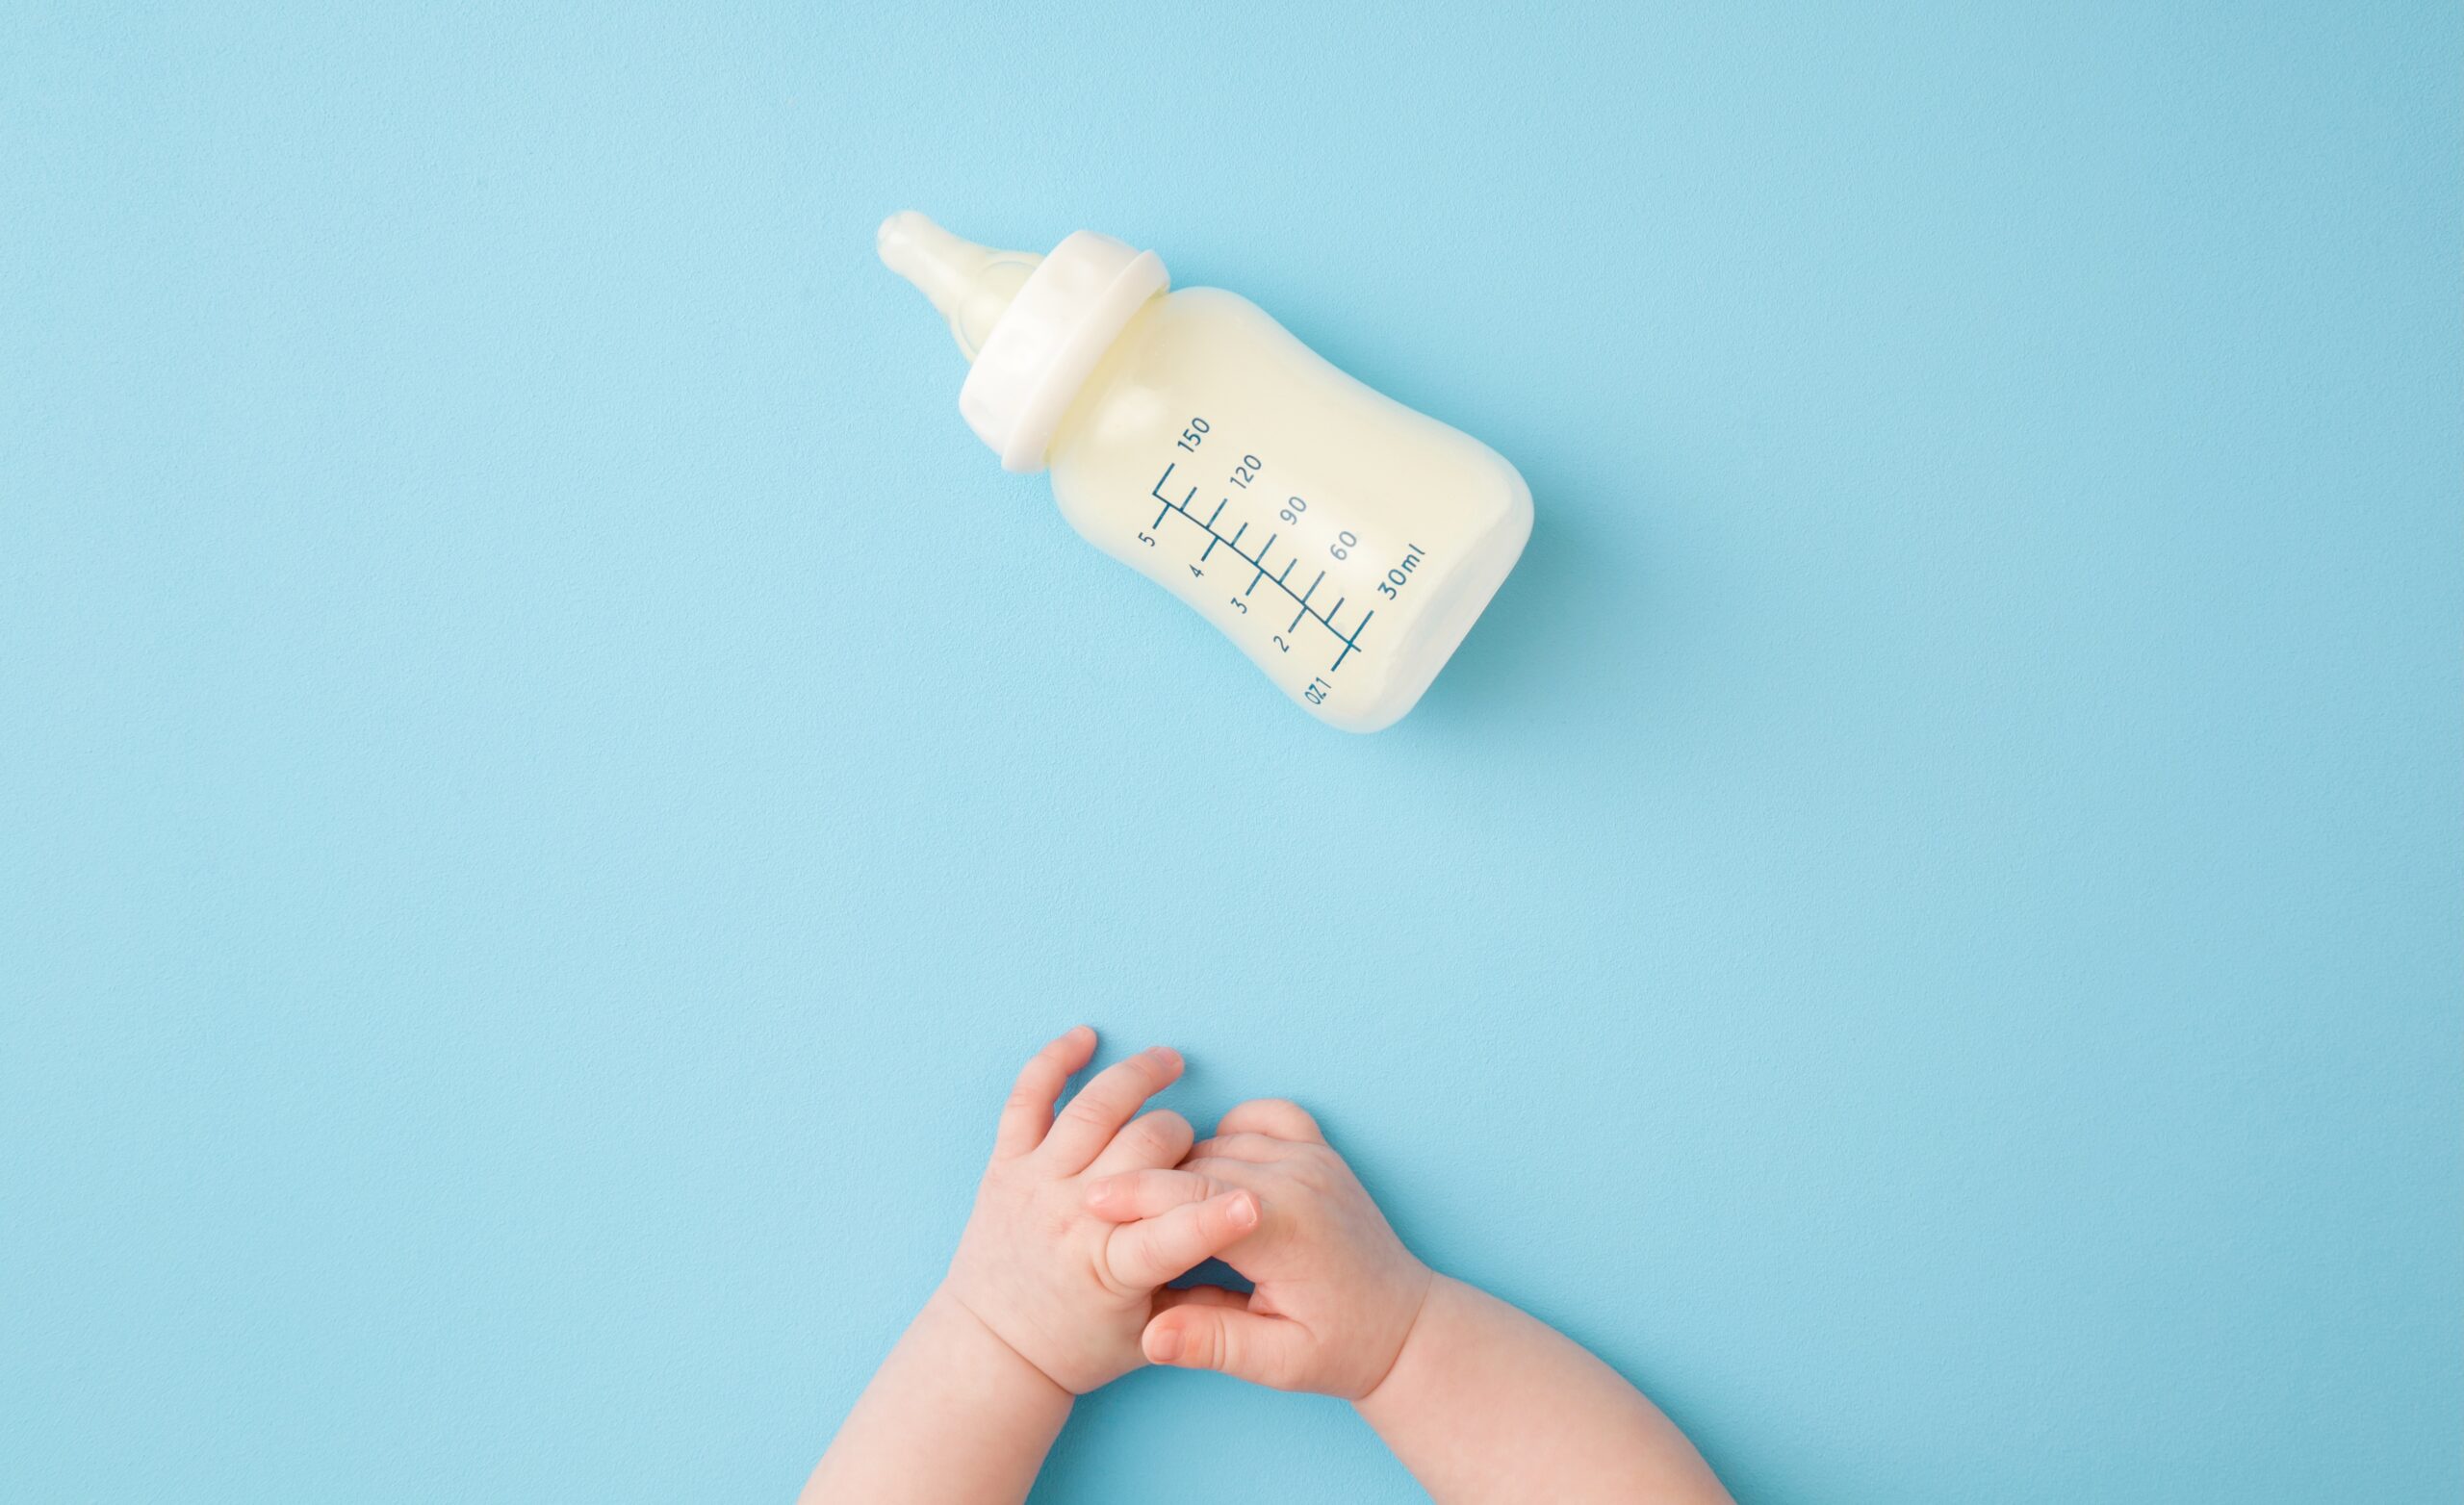 Baby hands folded in front of a bottle of formula on its side.